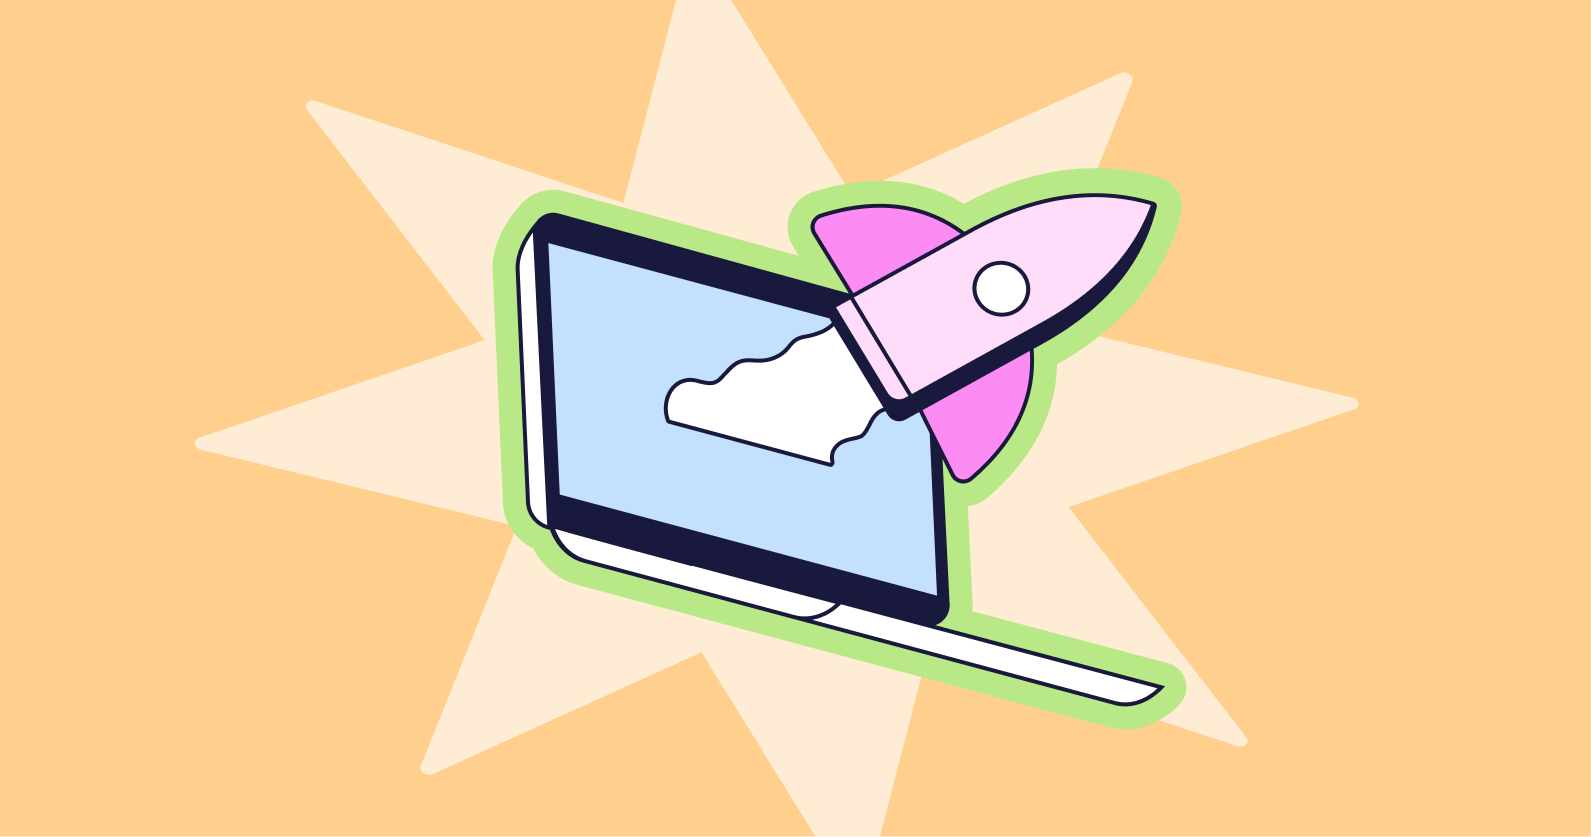 Illustration of a rocket coming out of a laptop.